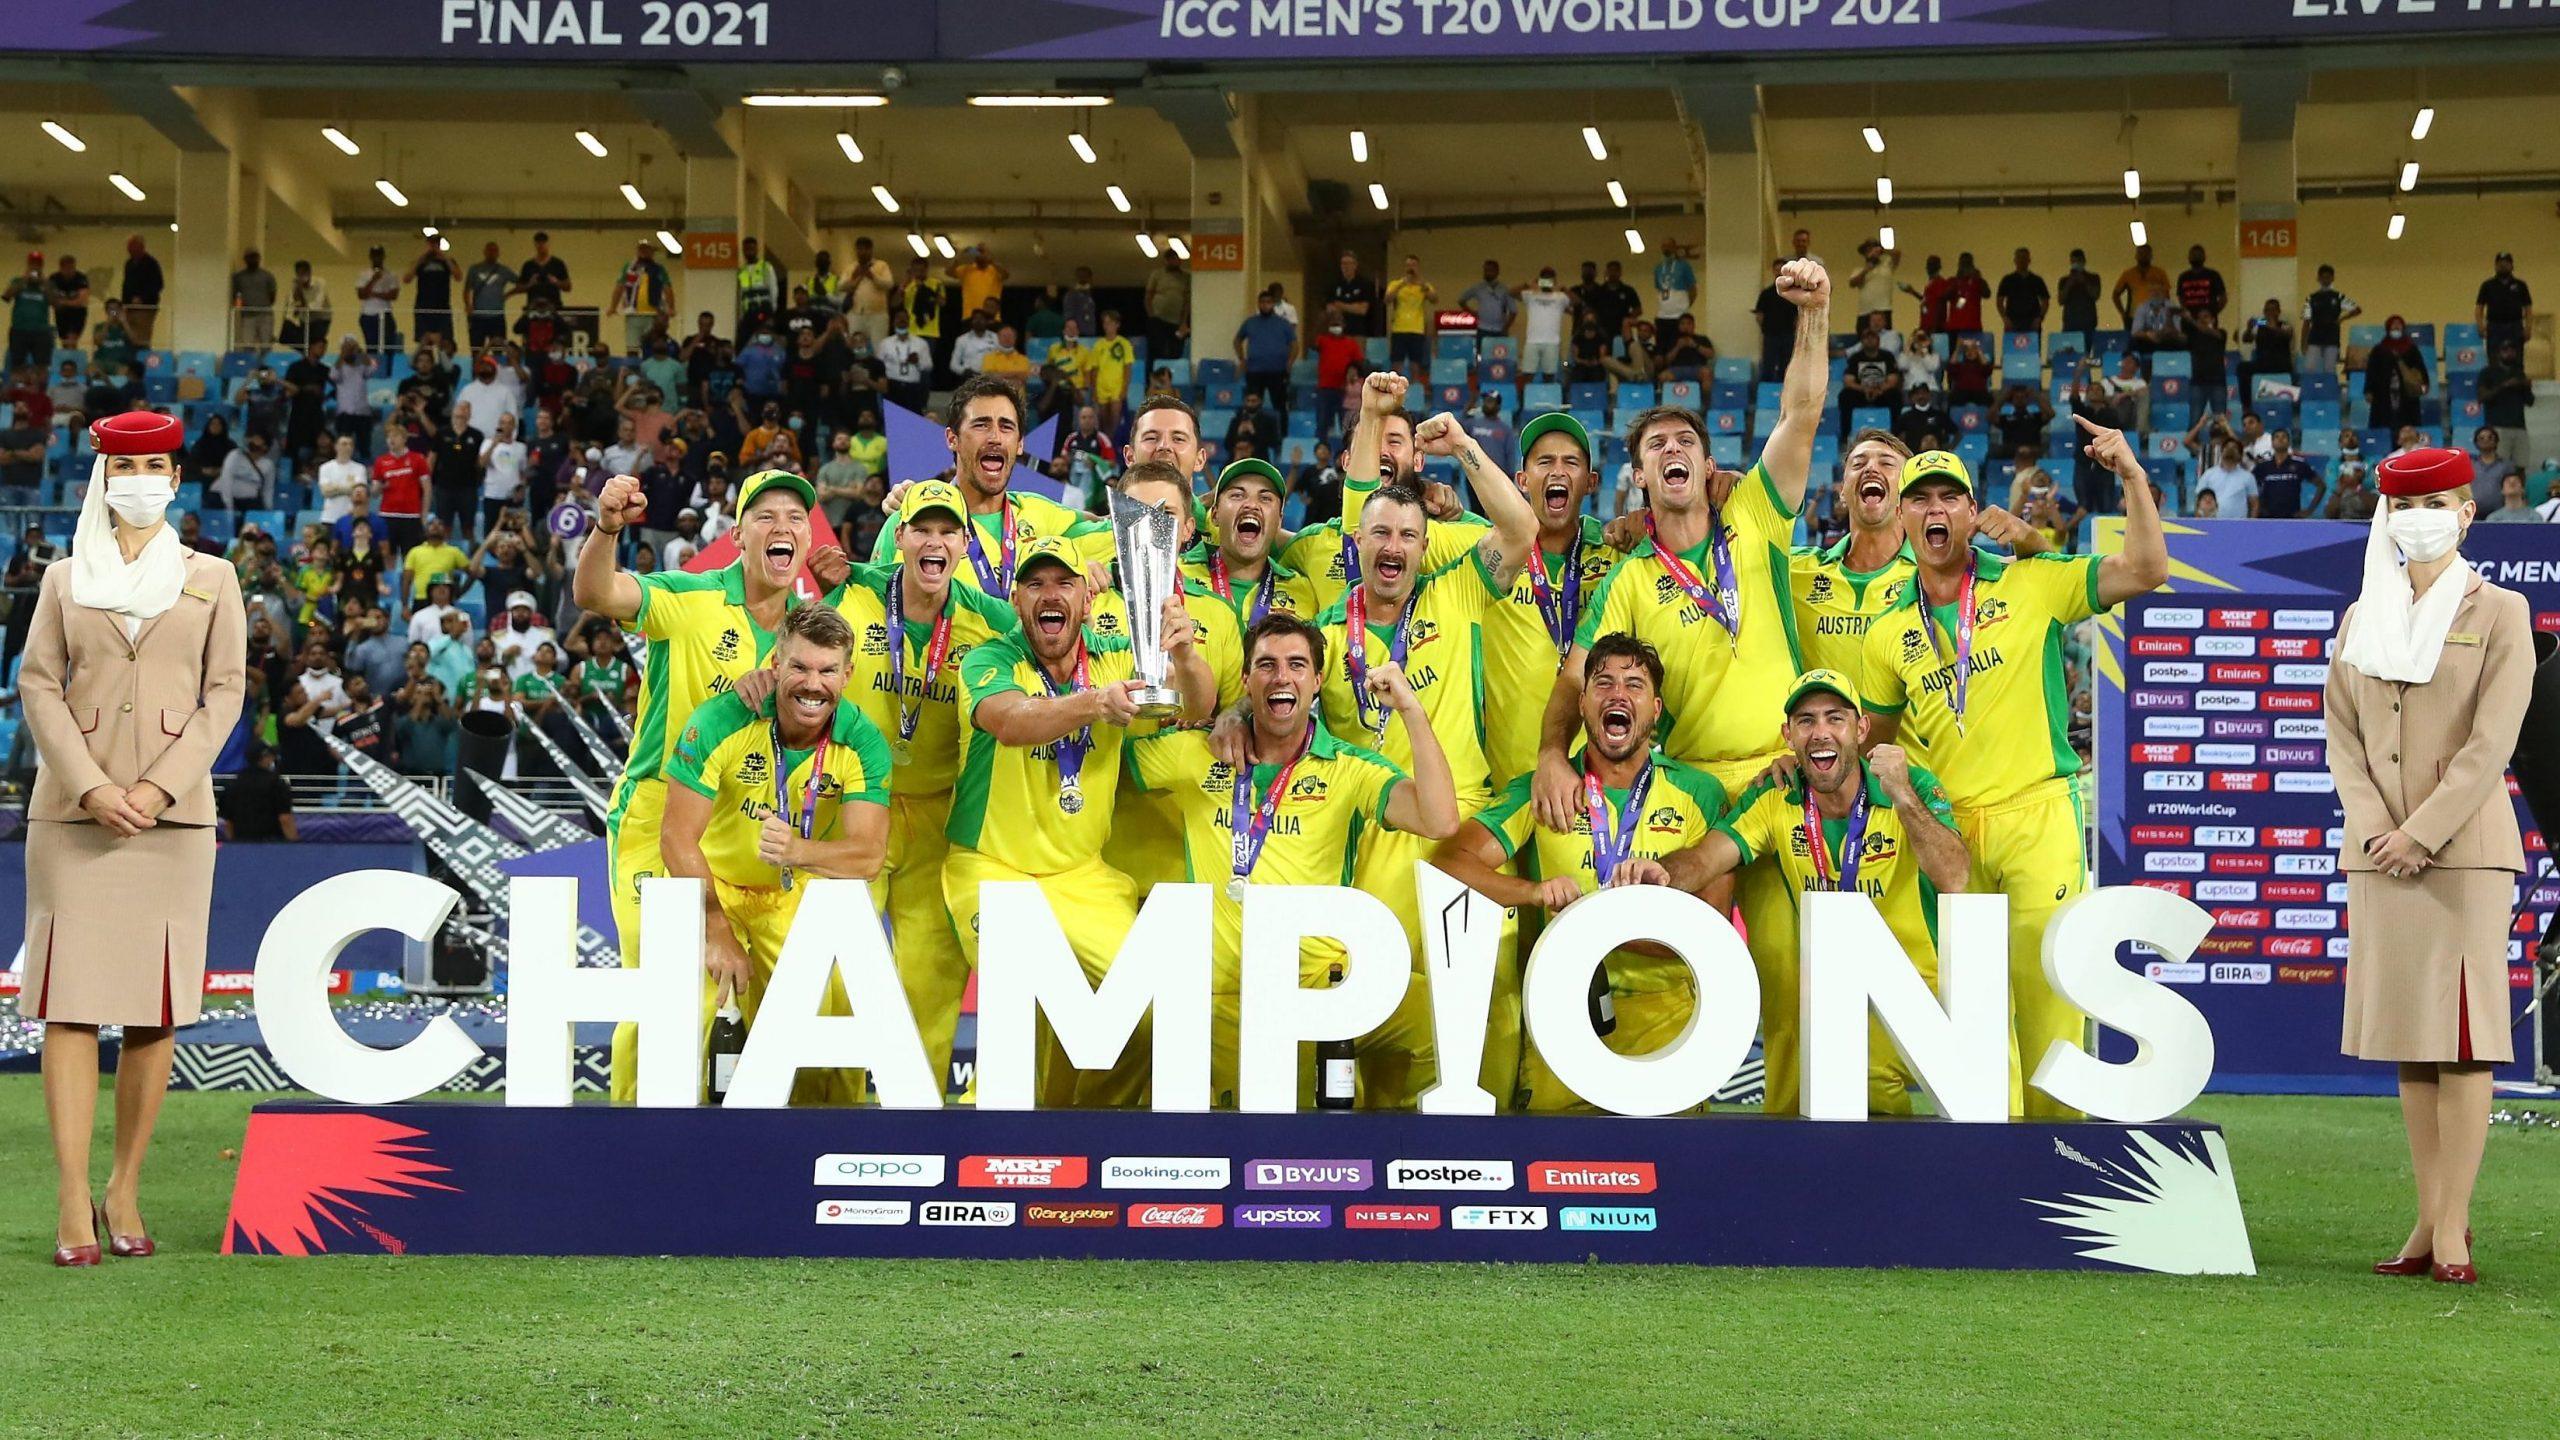 T20 World Cup: Australia wins their maiden T20 World Cup title_50.1